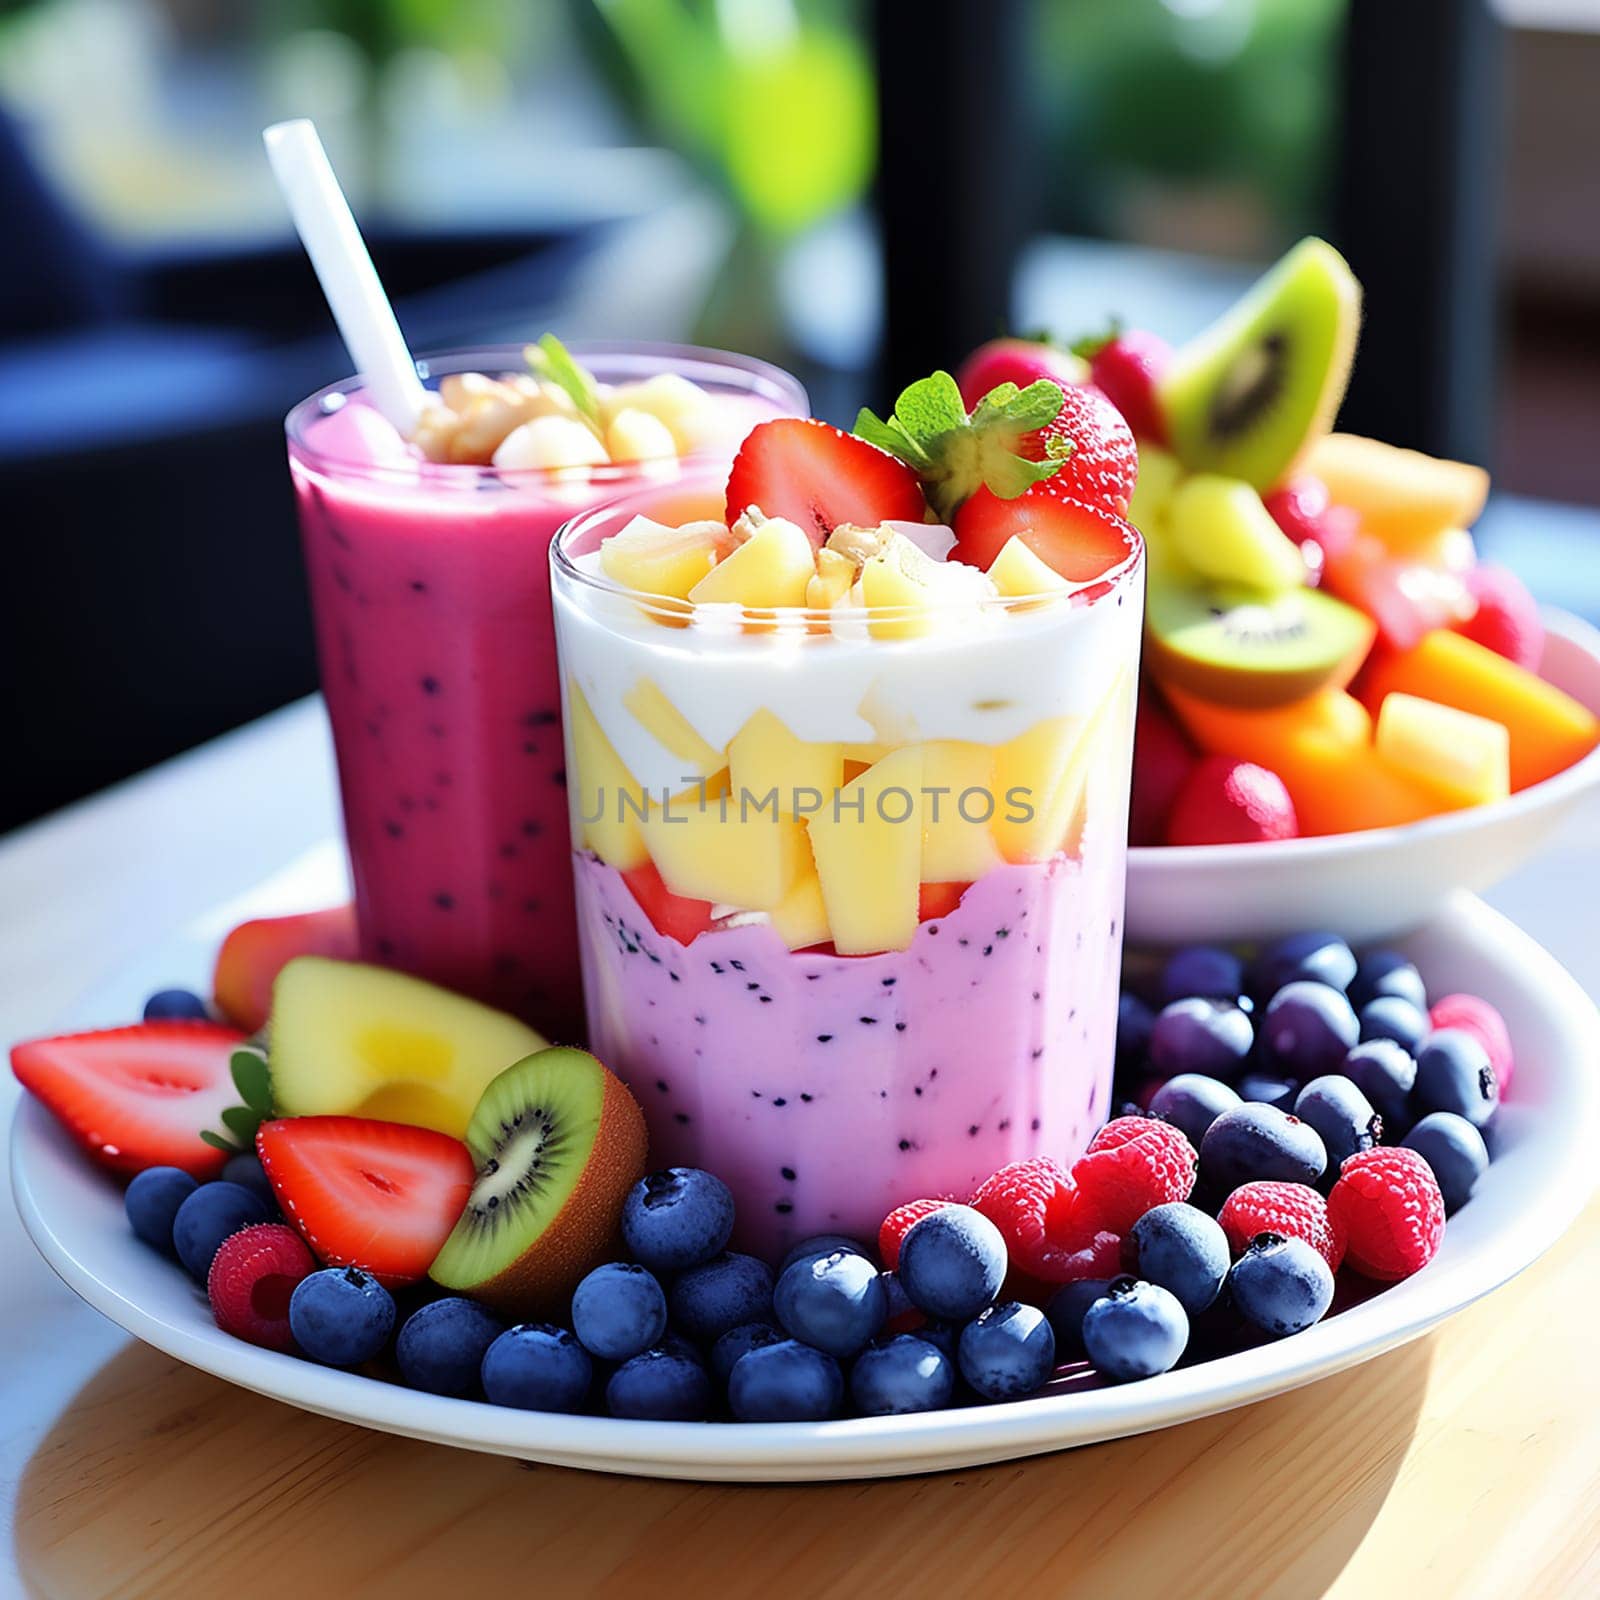 Fruit Fusion: Vibrant Salad and Smoothie Combinations